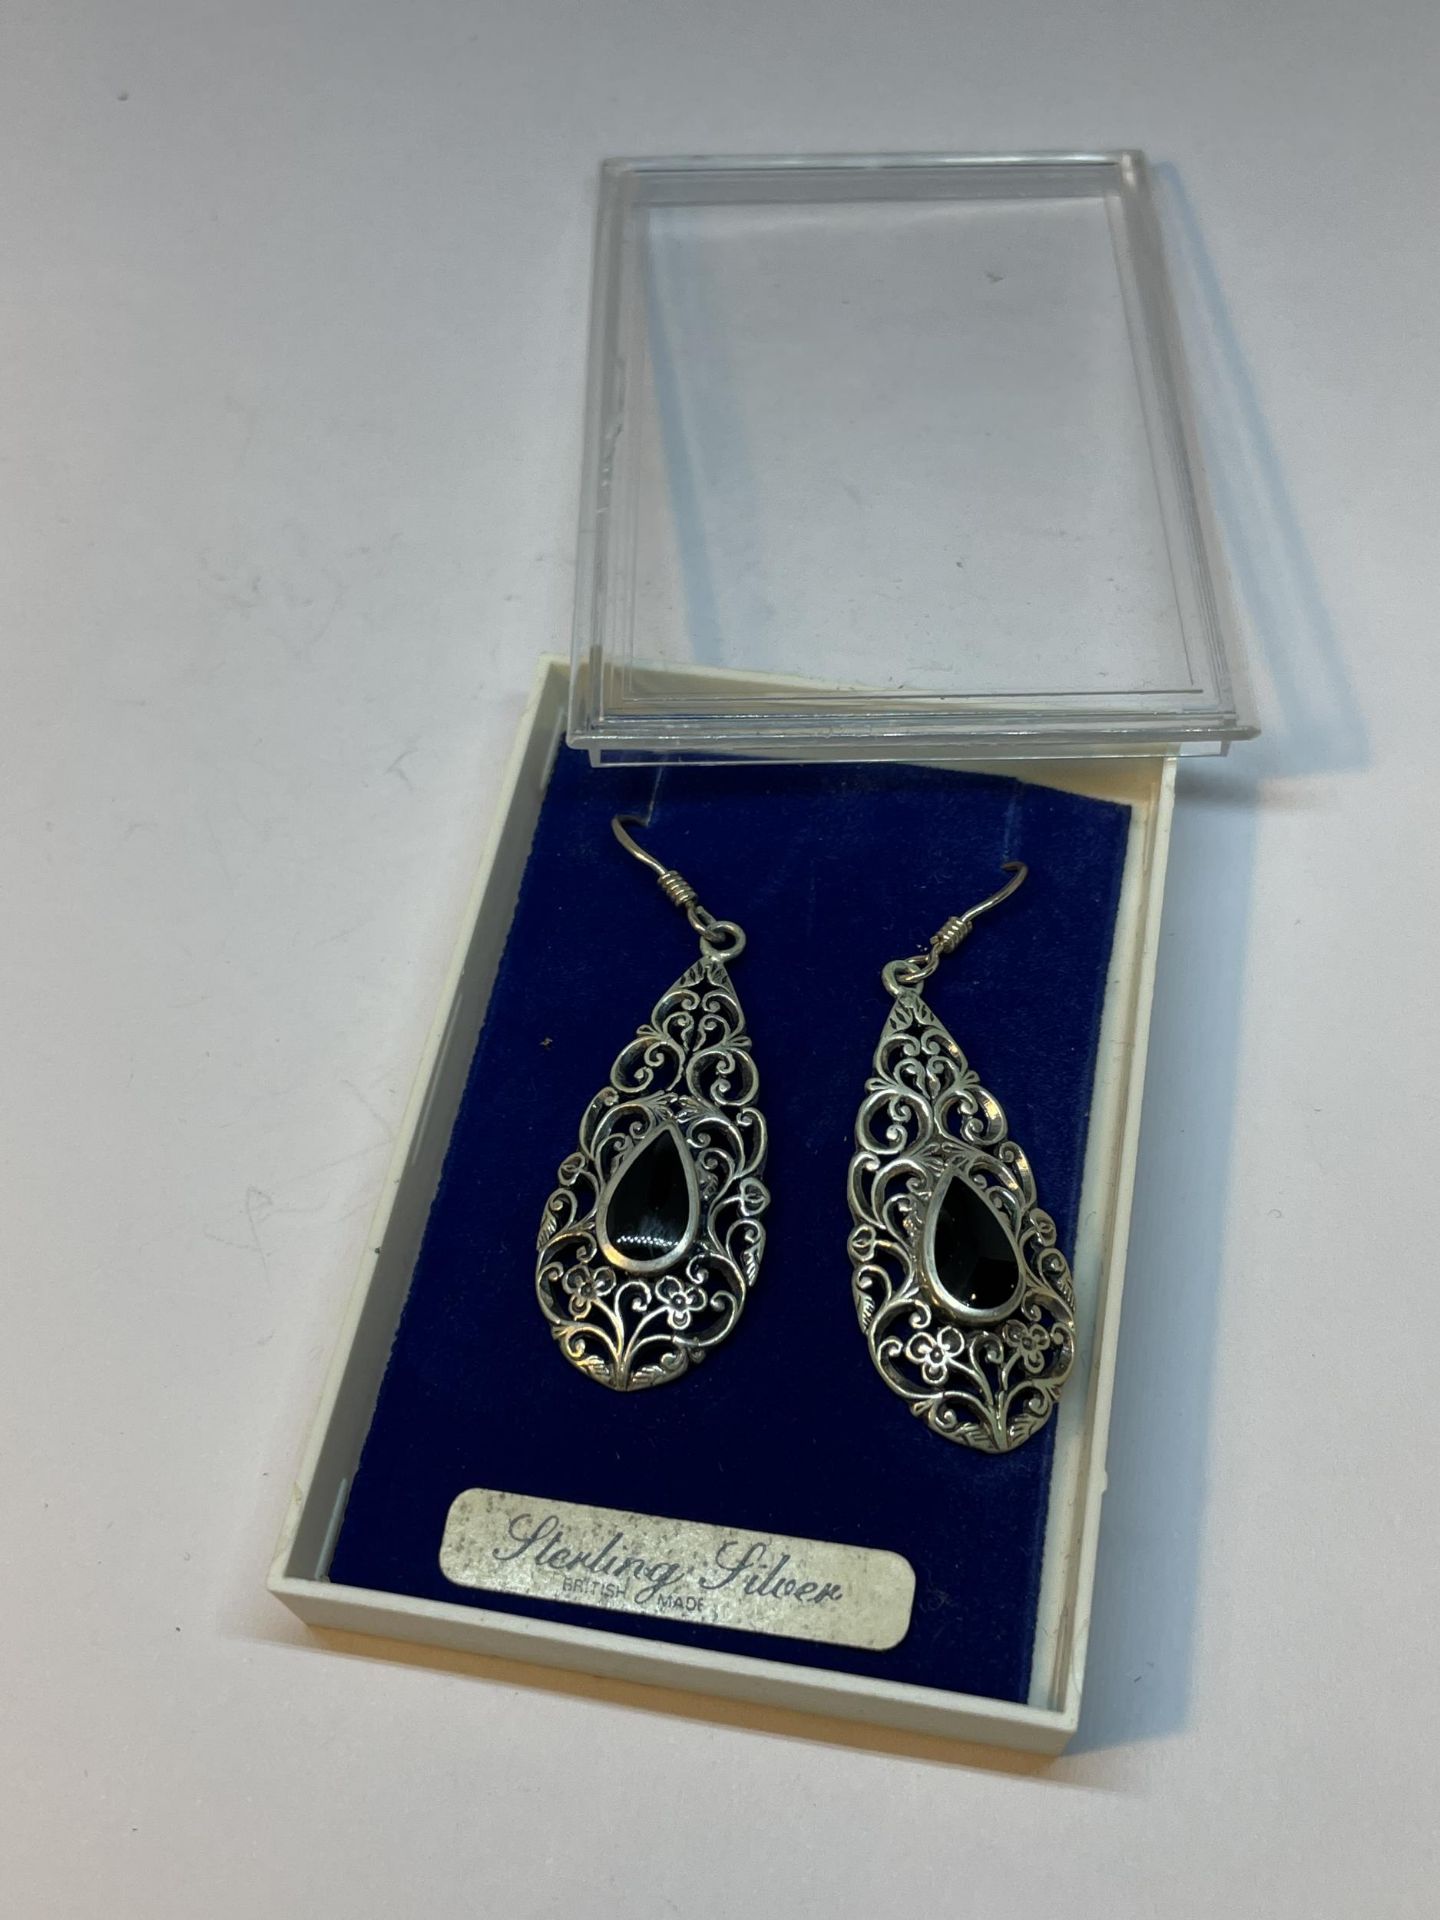 A PAIR OF SILVER AND BLACK STONE DROP EARRINGS IN A PRESENTATION BOX